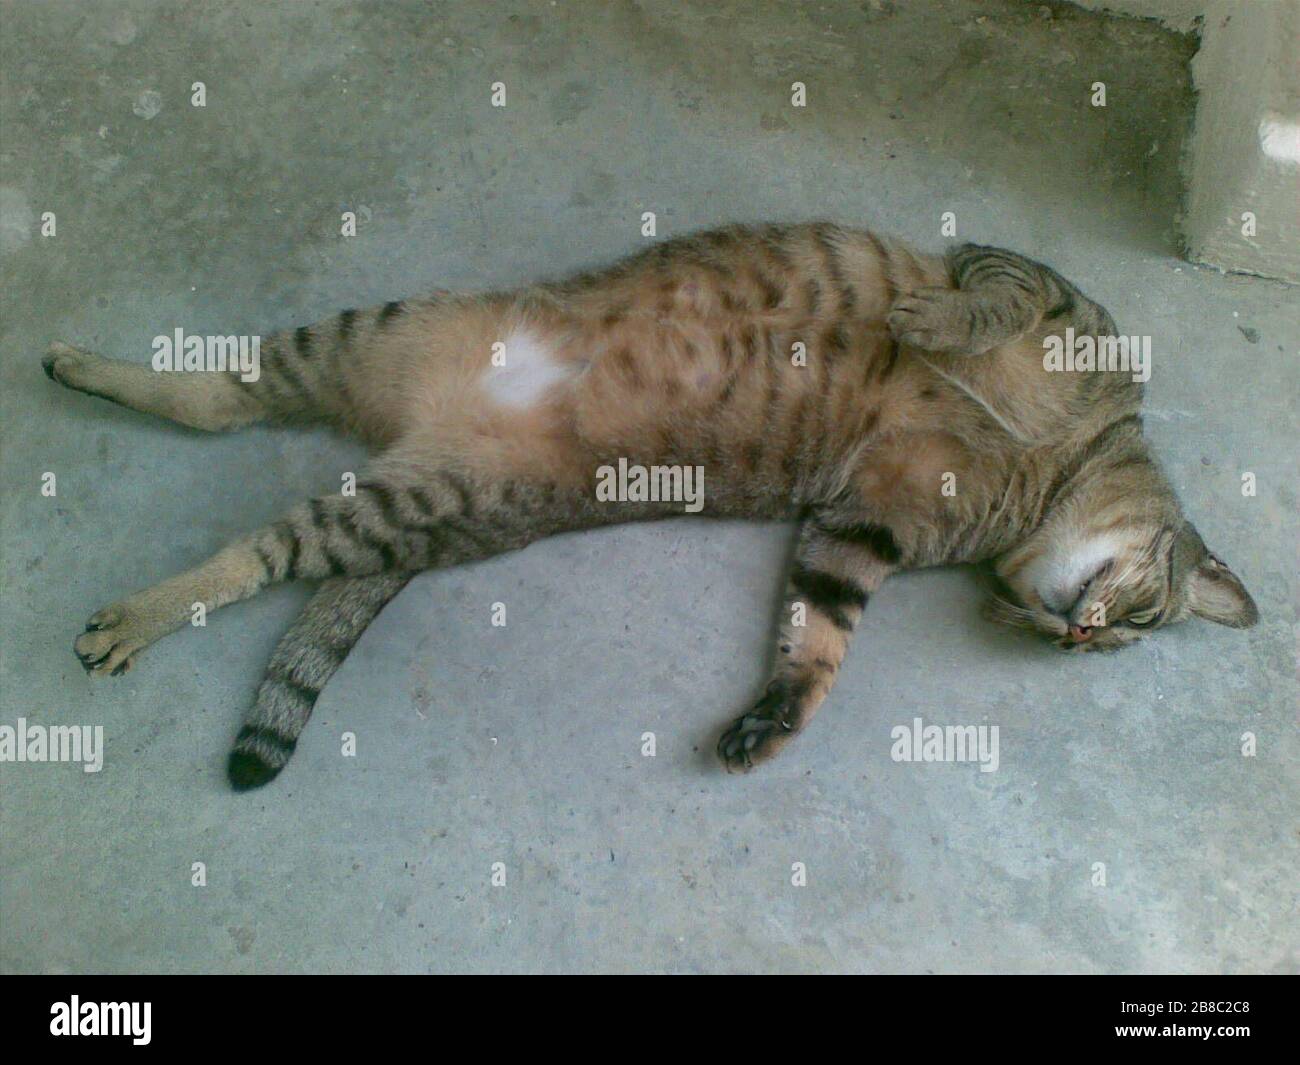 'English: A cat resting at a void deck at the bottom of a block of Housing and Development Board flats in Singapore. Français : Un chat se reposant sur une plate-forme vide au bas d'un immeuble de logements et de logements de développement à Singapour.; 9 January 2009; originally uploaded to en.wikipedia on 9 January 2010.; Own work; transferred from en.wikipedia using CommonsHelper.; Kcdtsg (David).; ' Stock Photo